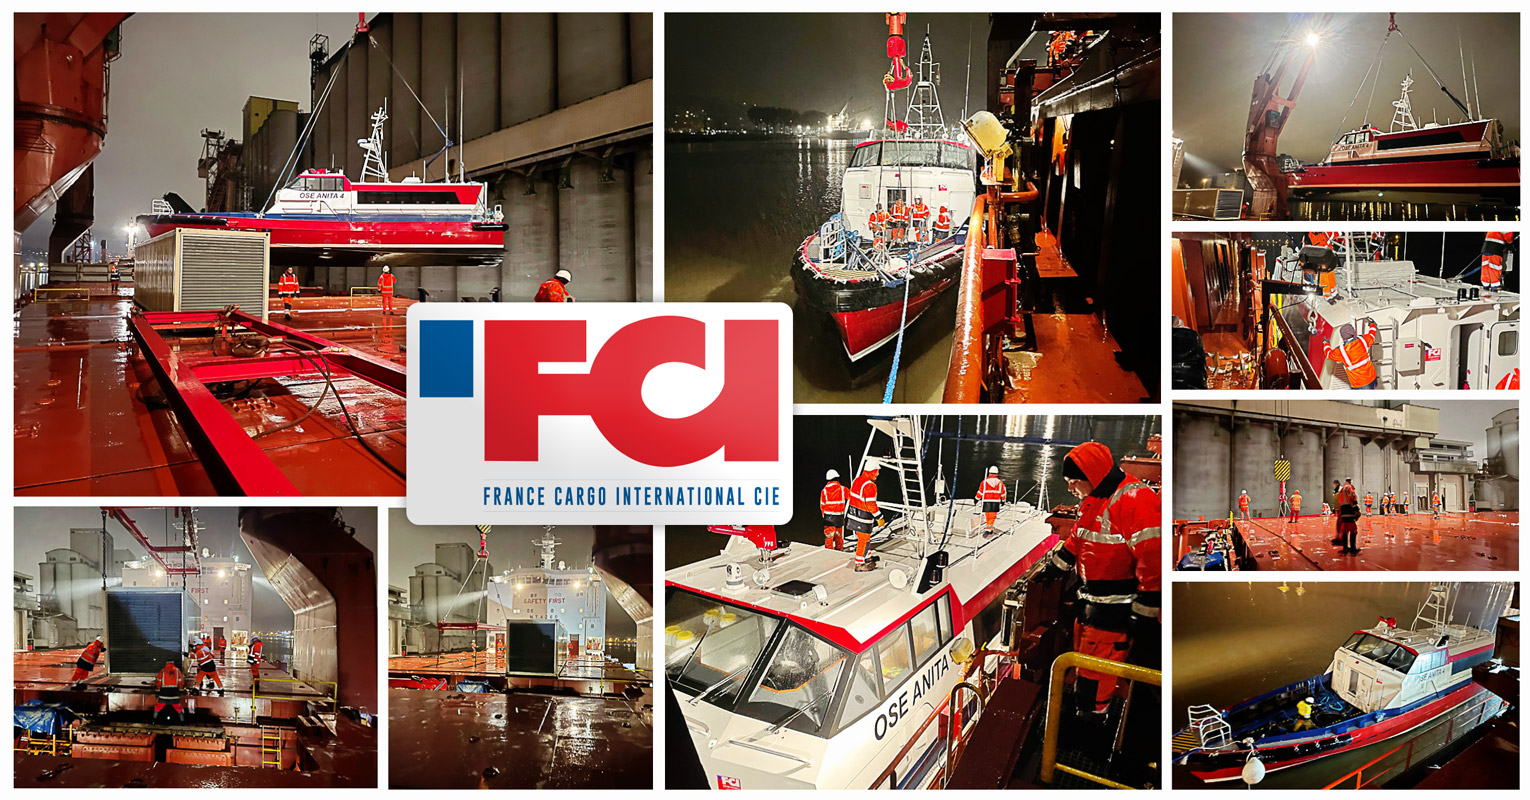 FCI Loaded their last Shipment of 2020 at Rouen Port on the Night of the 30th of December